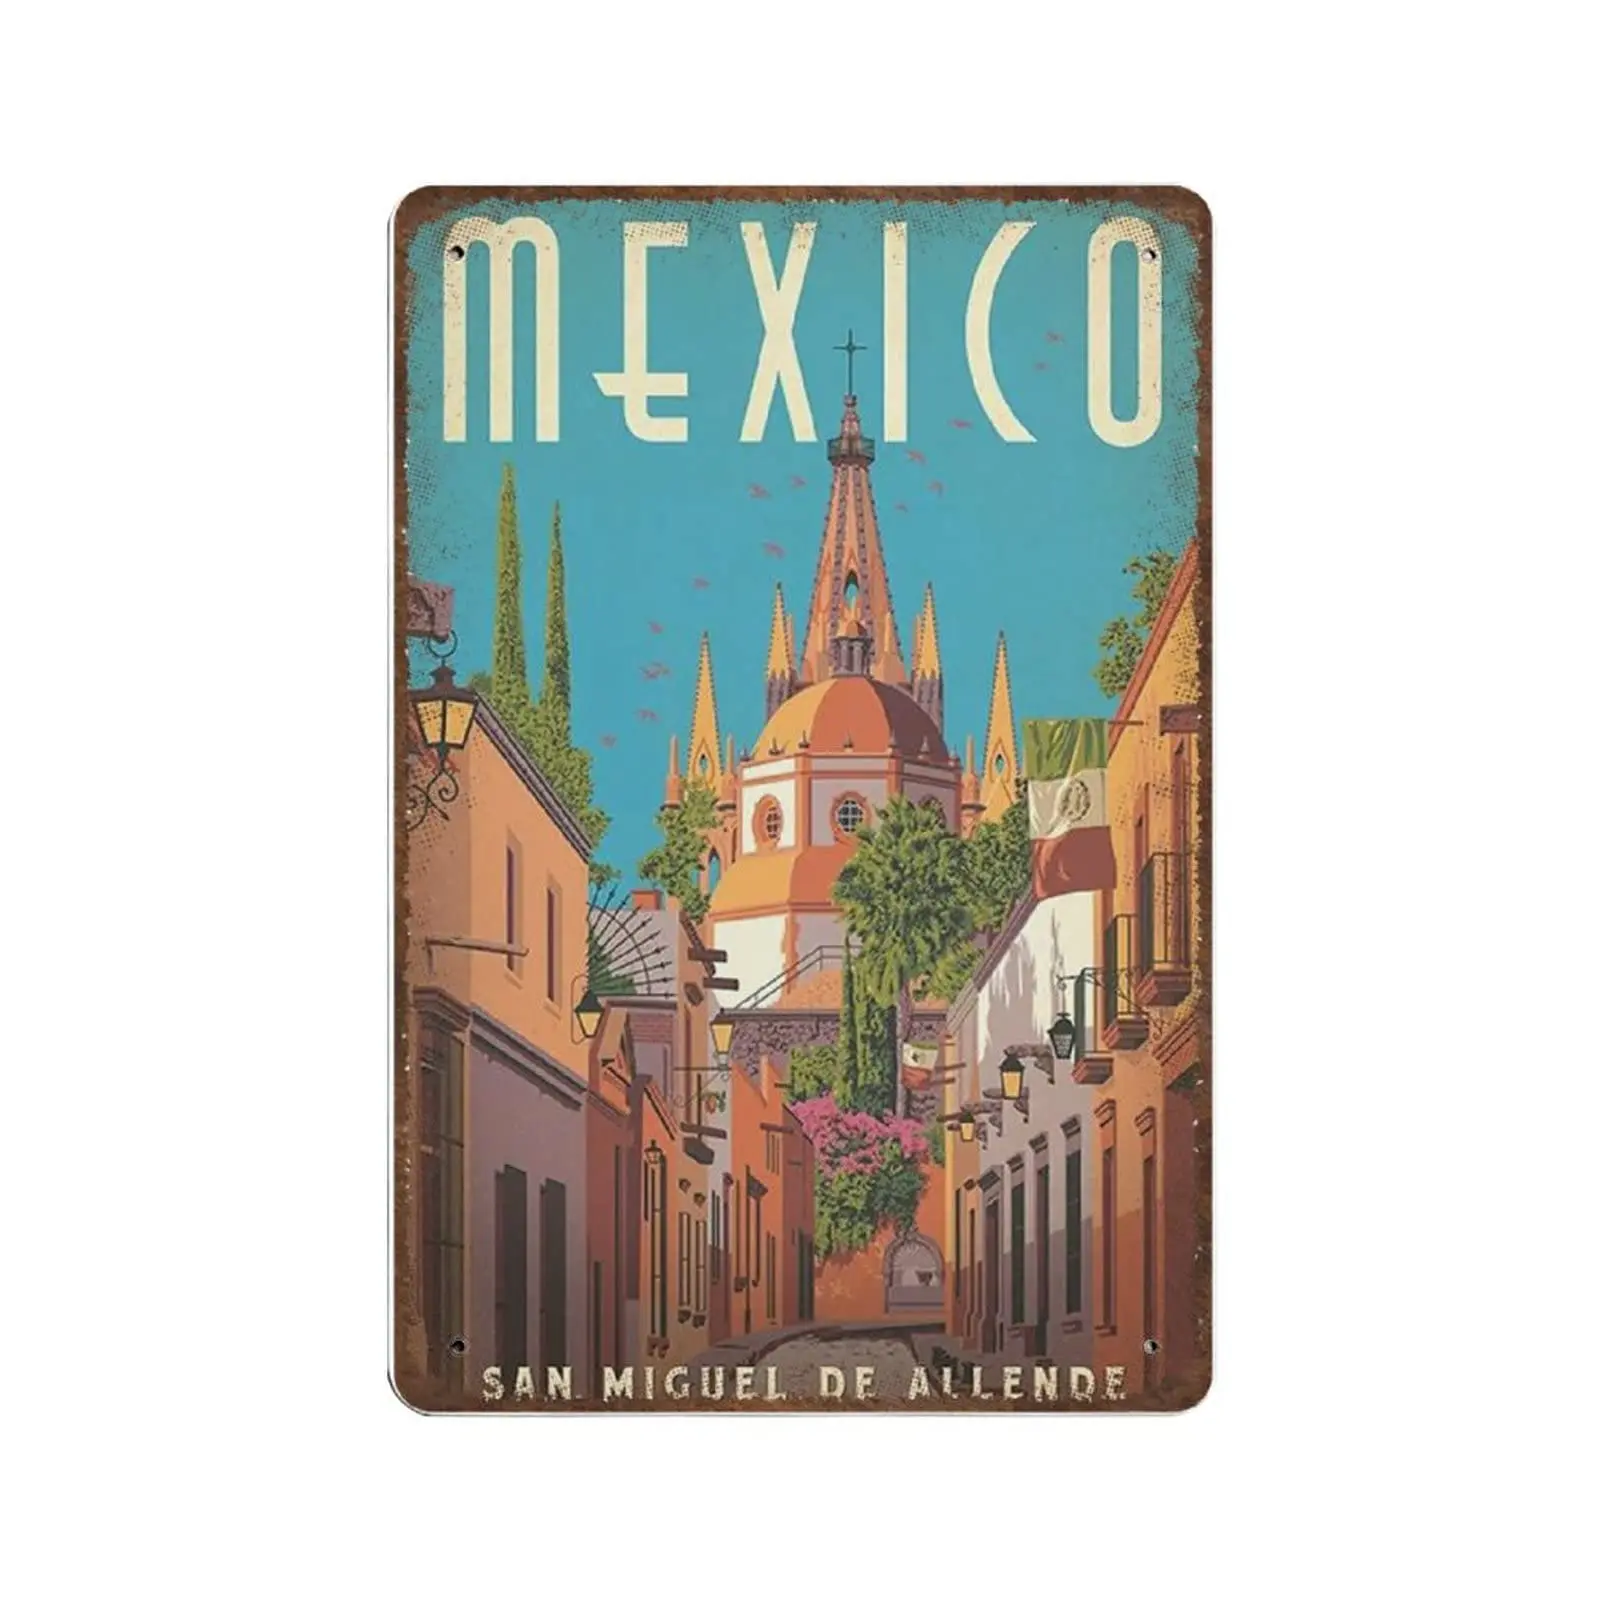 

Retro Thick Metal Tin Sign-Mexico San Miguel De Allende Travel Tin Sign-Novelty Posters，Home Decor Wall Art，Funny Signs for Home